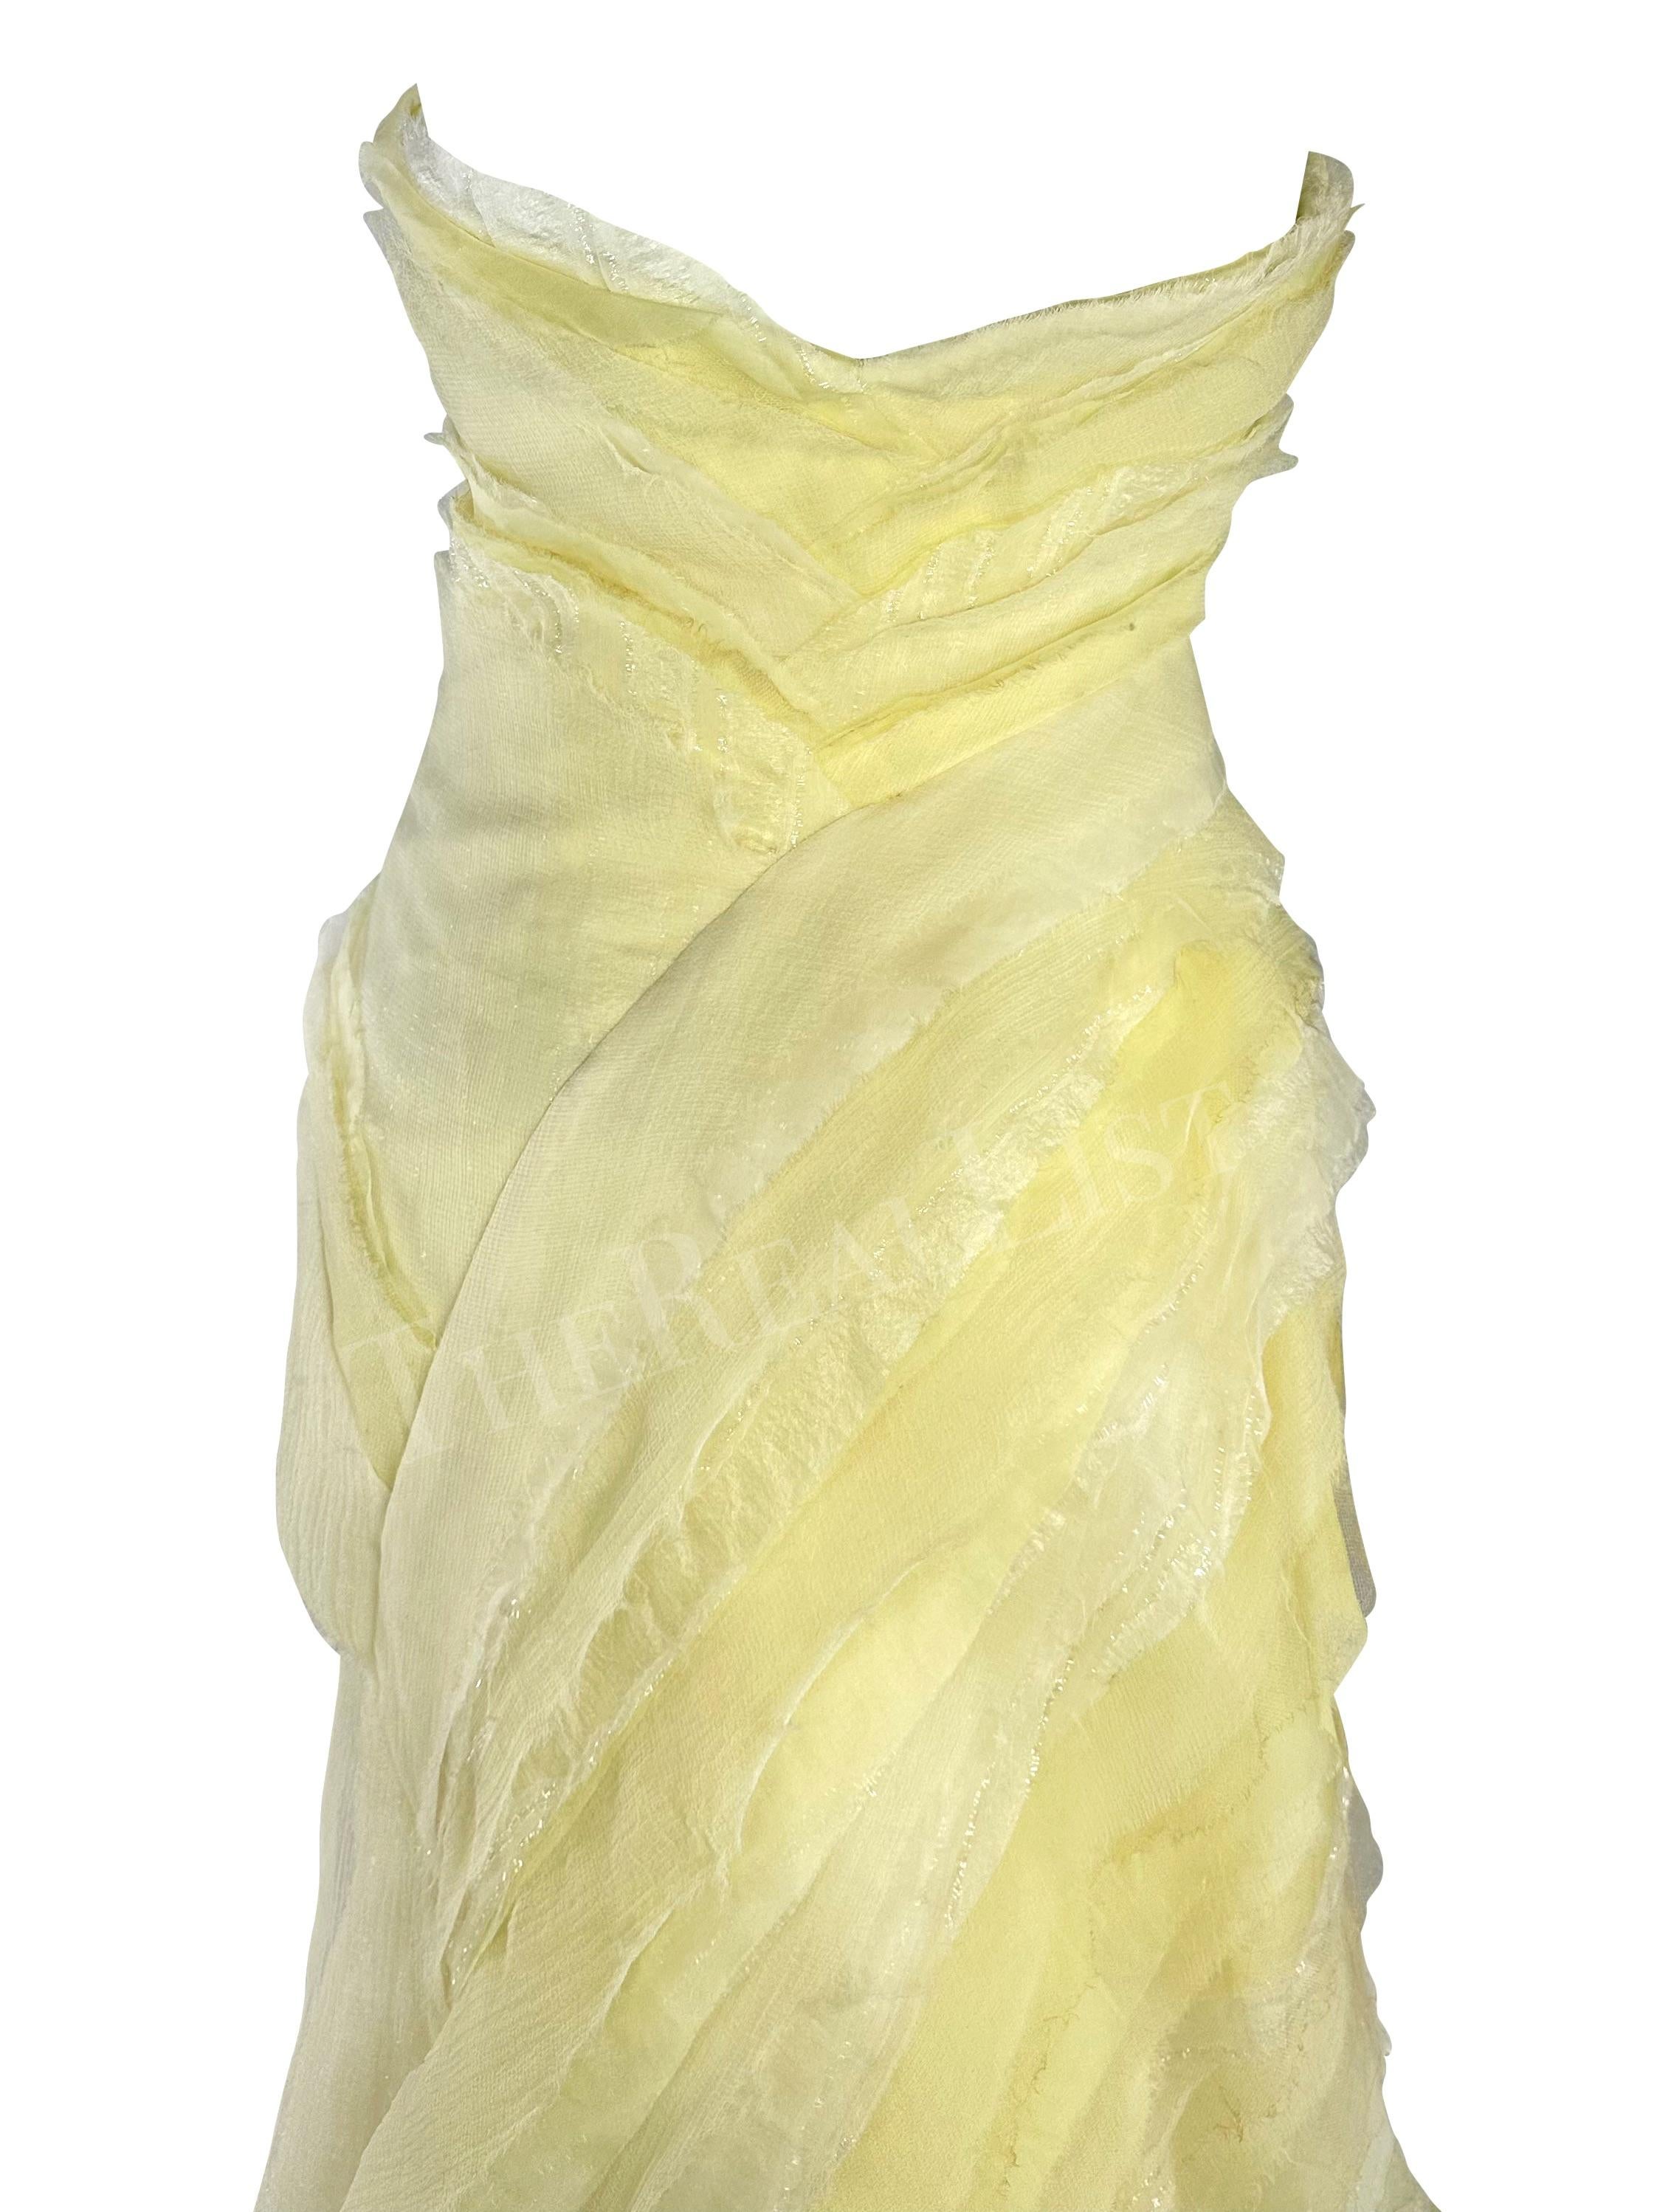 2010 Roberto Cavalli Custom Red Carpet Pastel Canary Yellow Tulle Gown Train For Sale 5